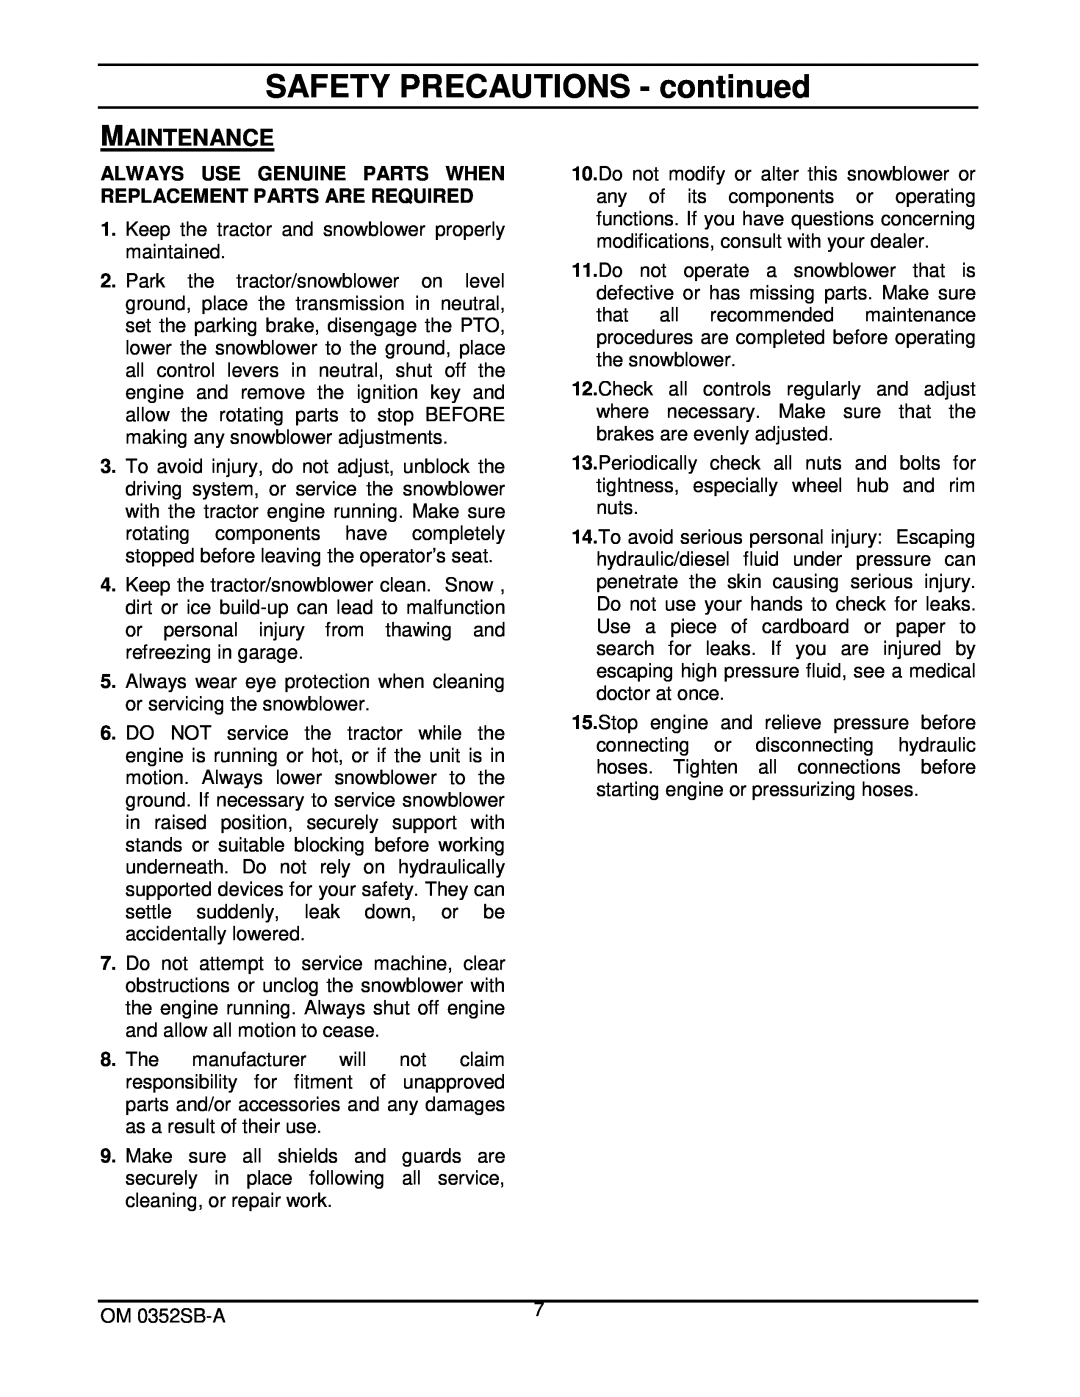 Walker 5600-20 manual SAFETY PRECAUTIONS - continued, Maintenance 